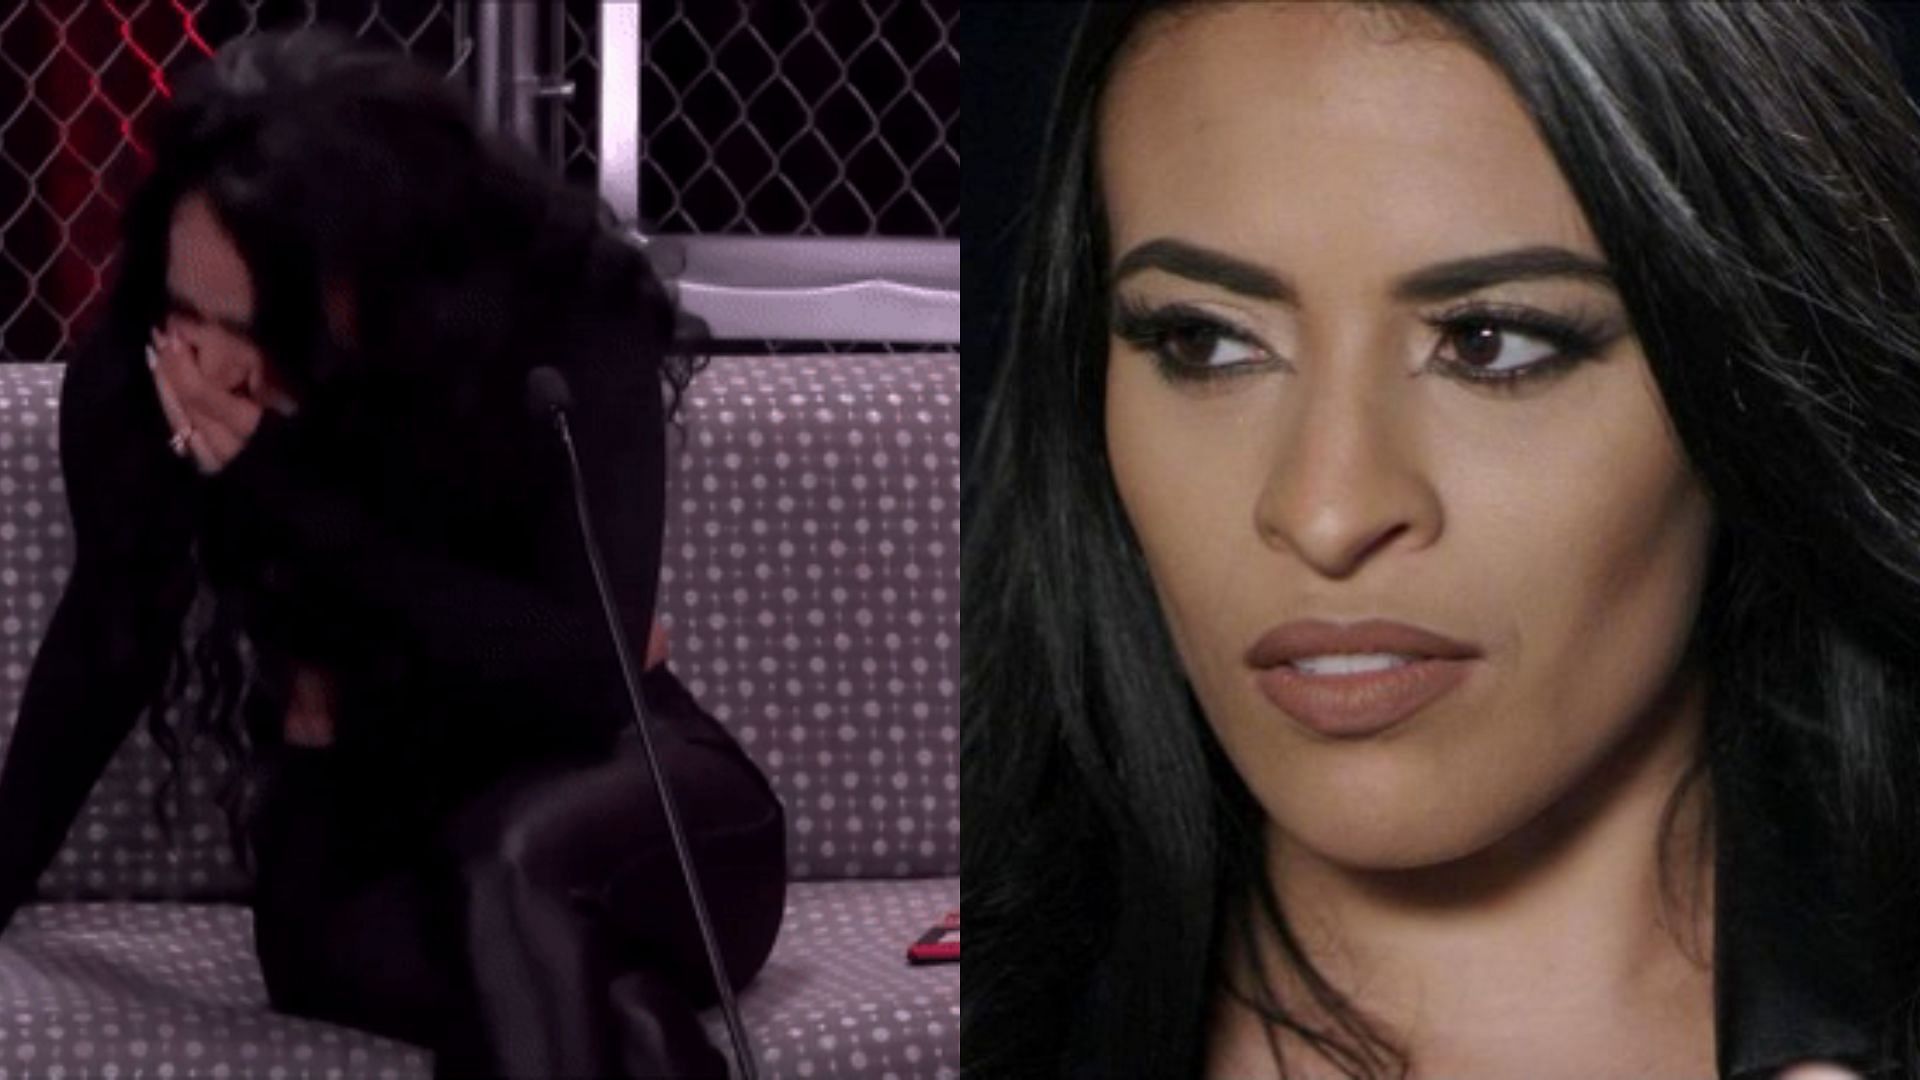 Zelina Vega found herself in the middle of a situation with fans